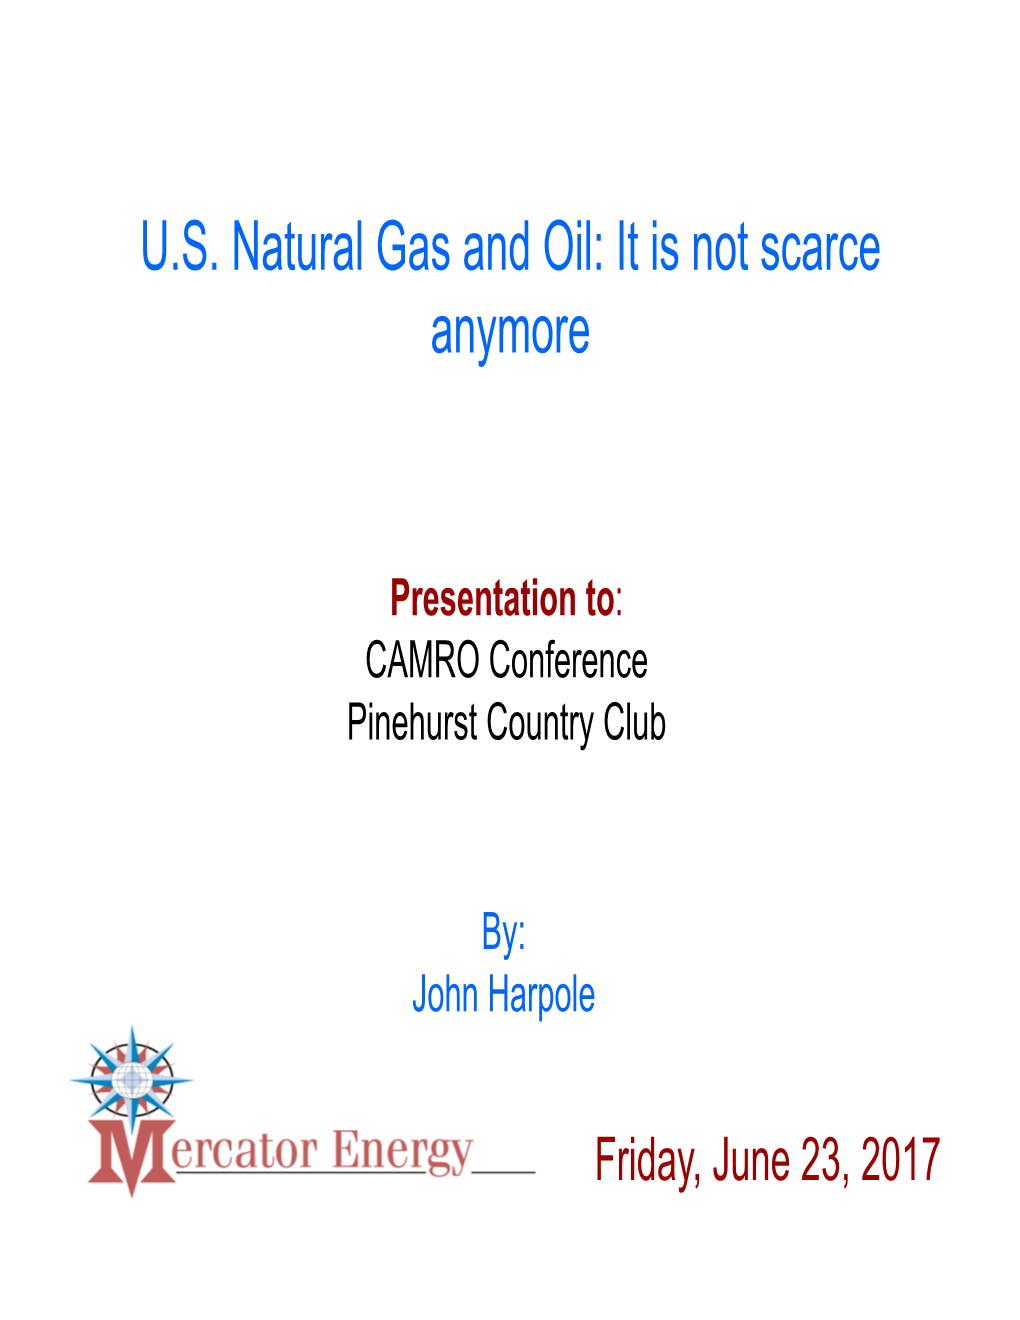 U.S. Natural Gas and Oil: It Is Not Scarce Anymore